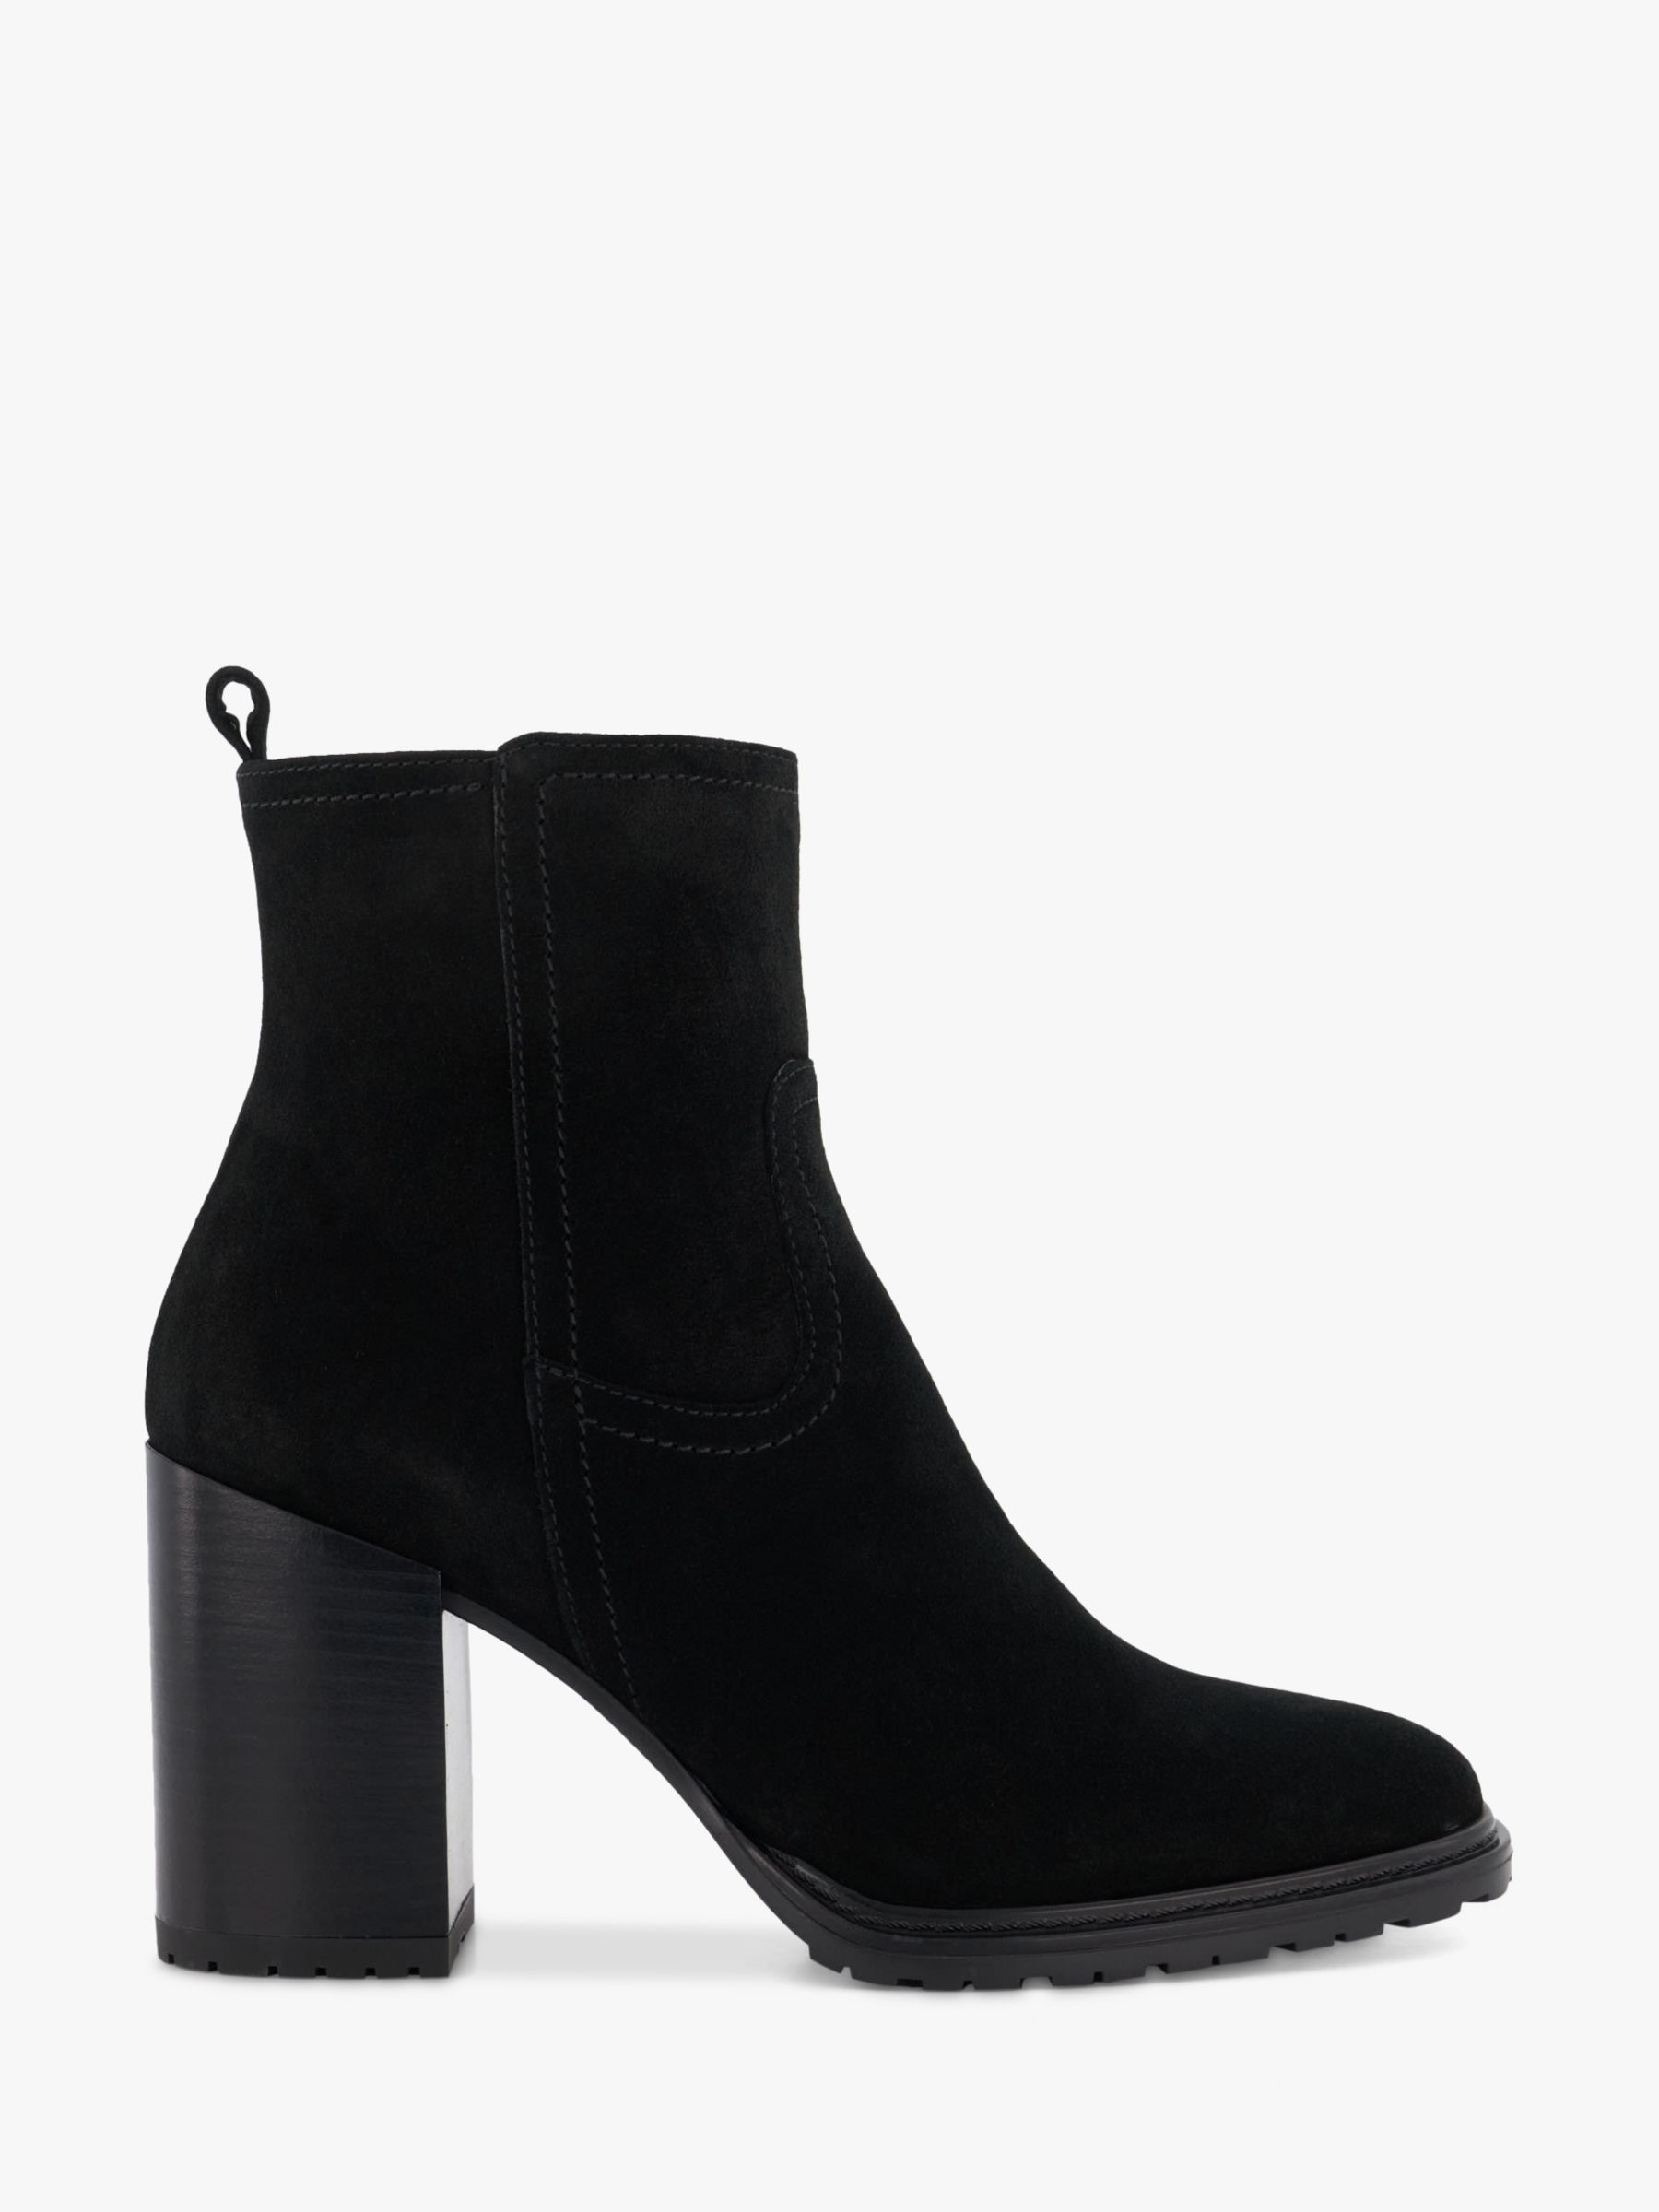 Dune Peng Suede Heeled Ankle Boots, Black at John Lewis & Partners